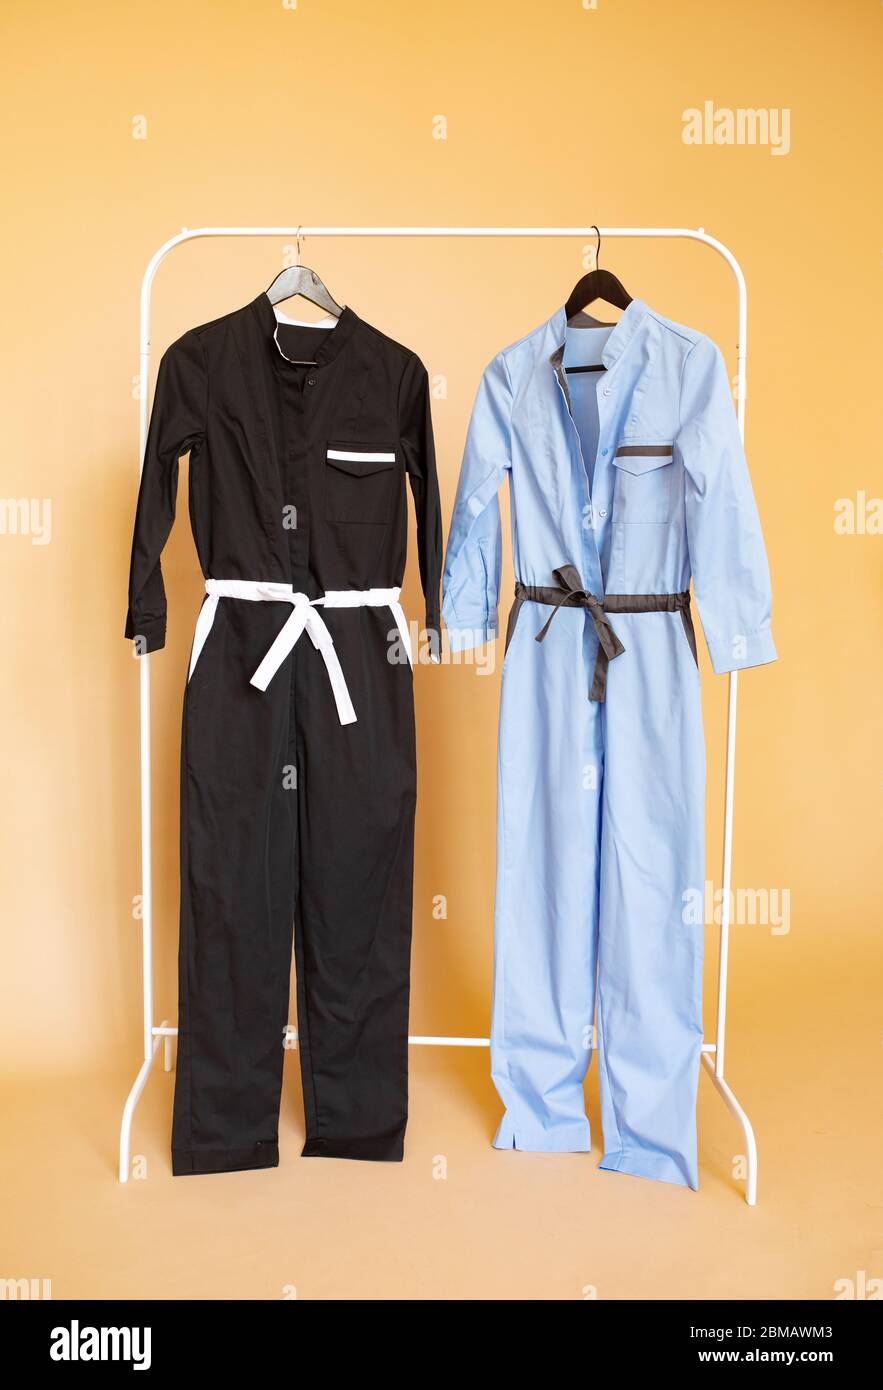 Two overalls for medical workers are on a rack hanger on an orange background. Stock Photo